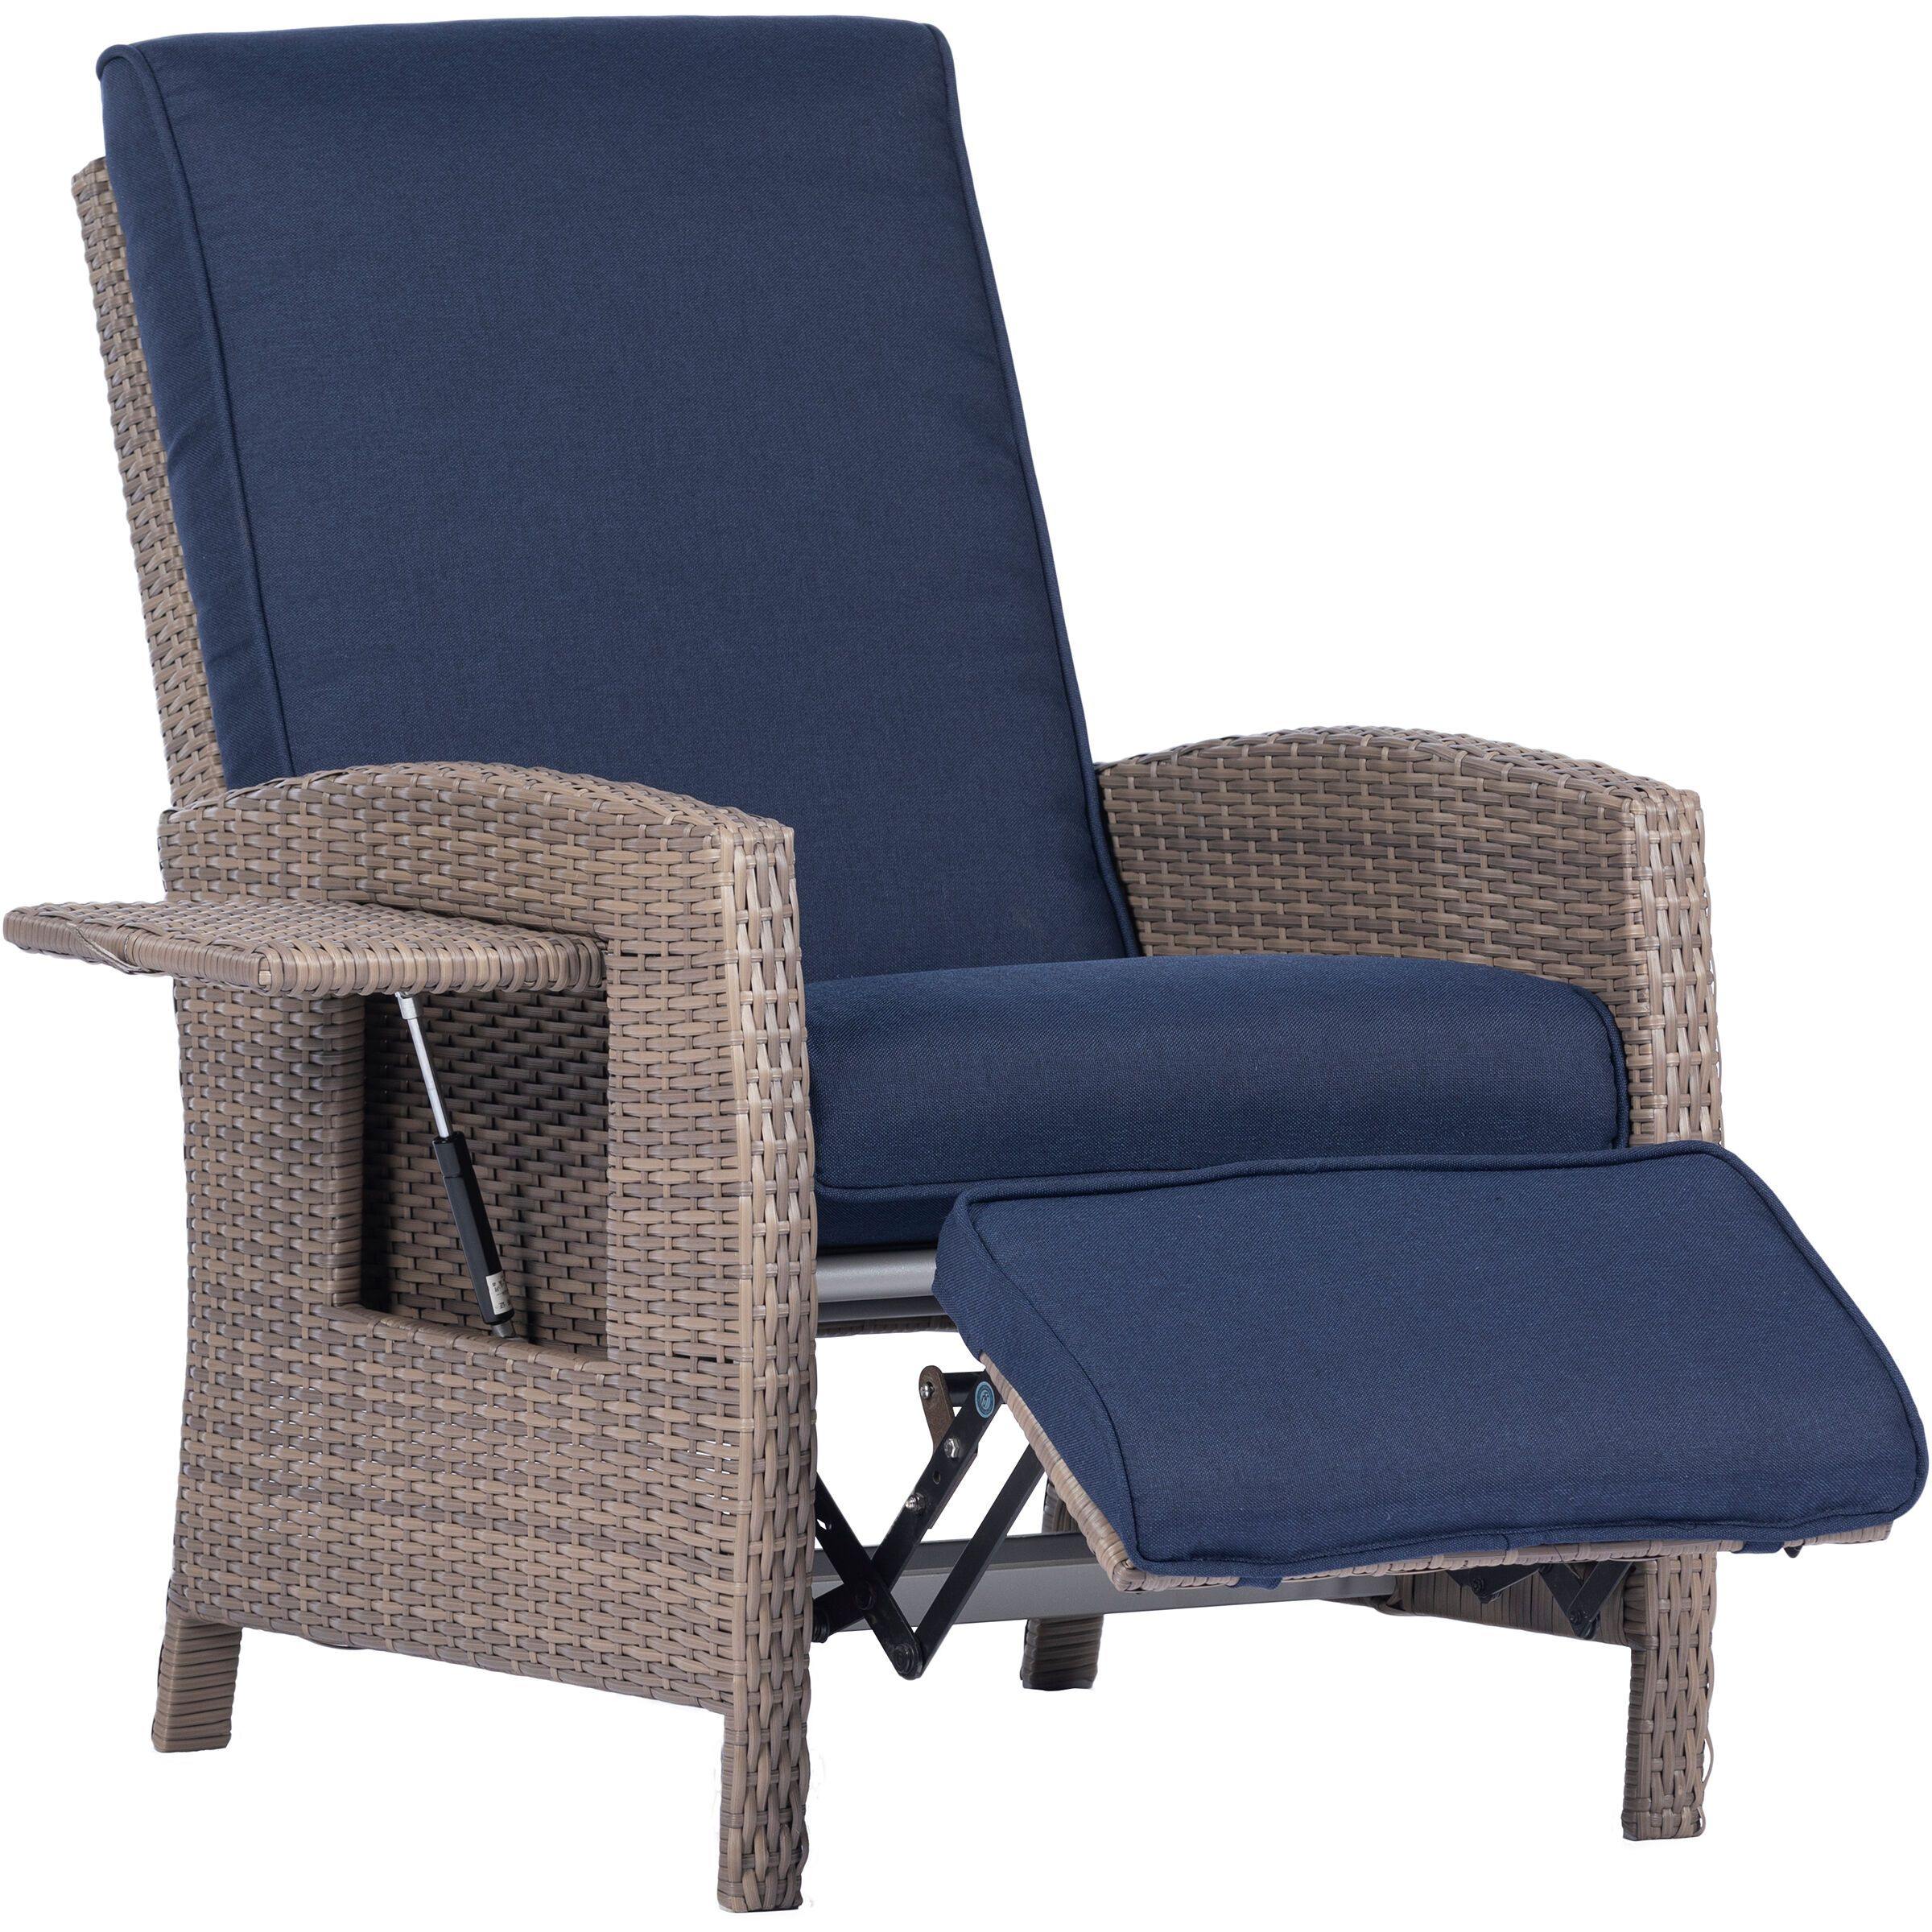 Hanover Hanover Portland Outdoor Recliner with Pop-Out Shelf in Navy Blue